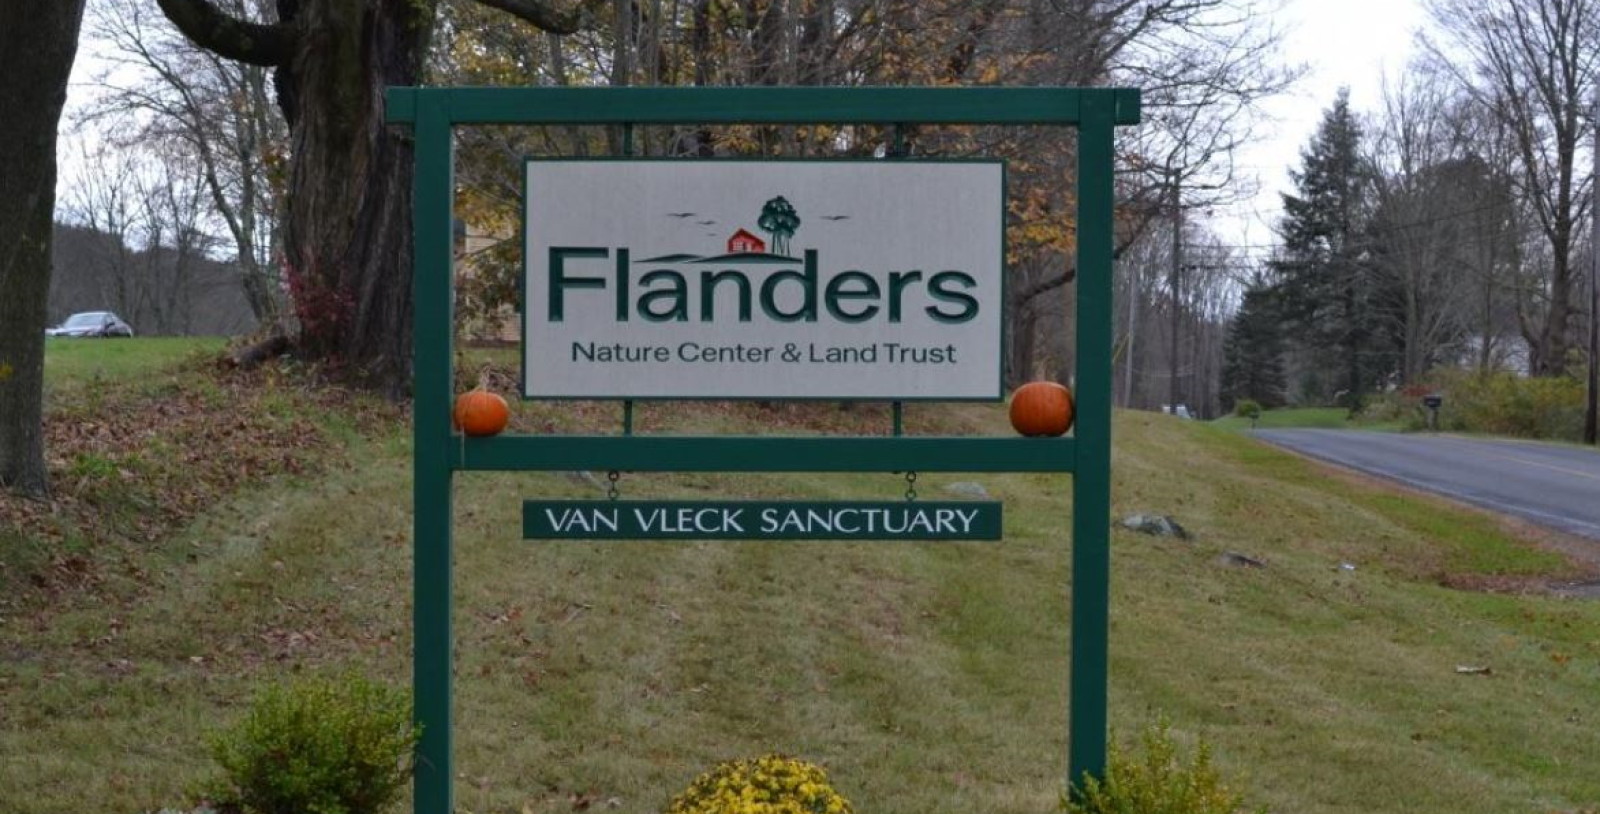 Experience the verdant hiking trails that wind throughout Flanders Nature Center.